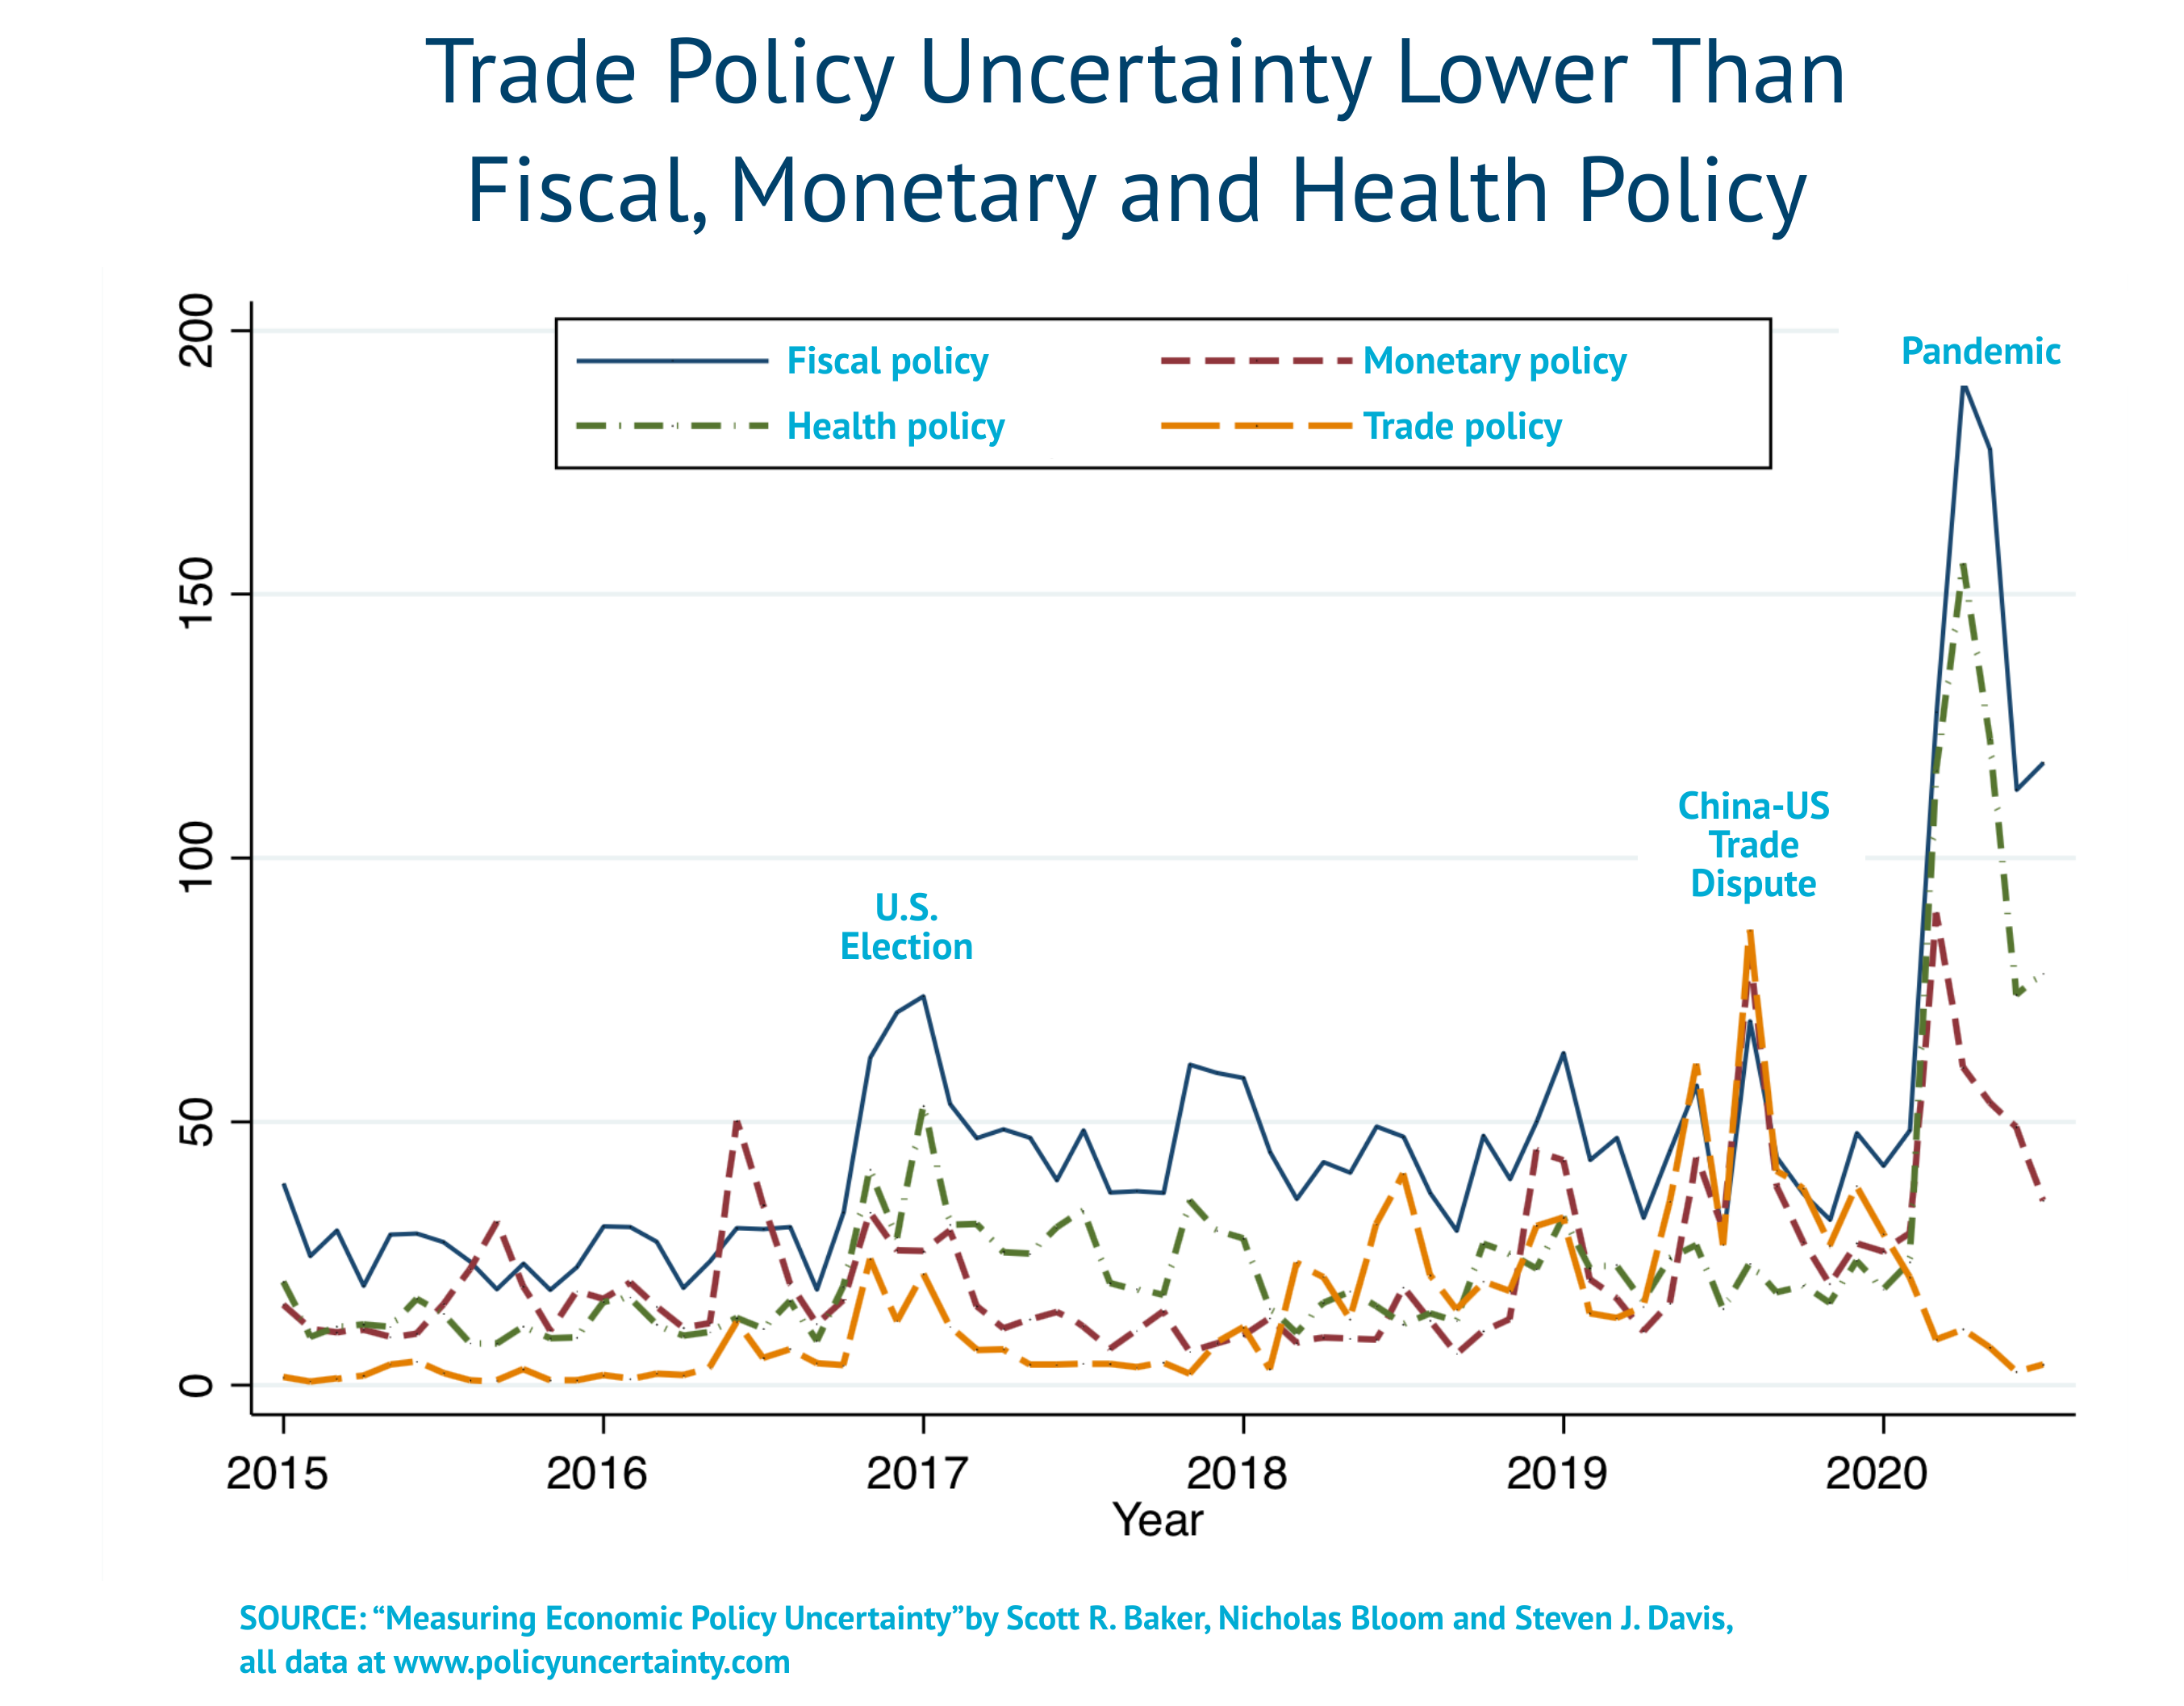 Why the stock market went up during the Covid-19 pandemic and high  unemployment - Vox